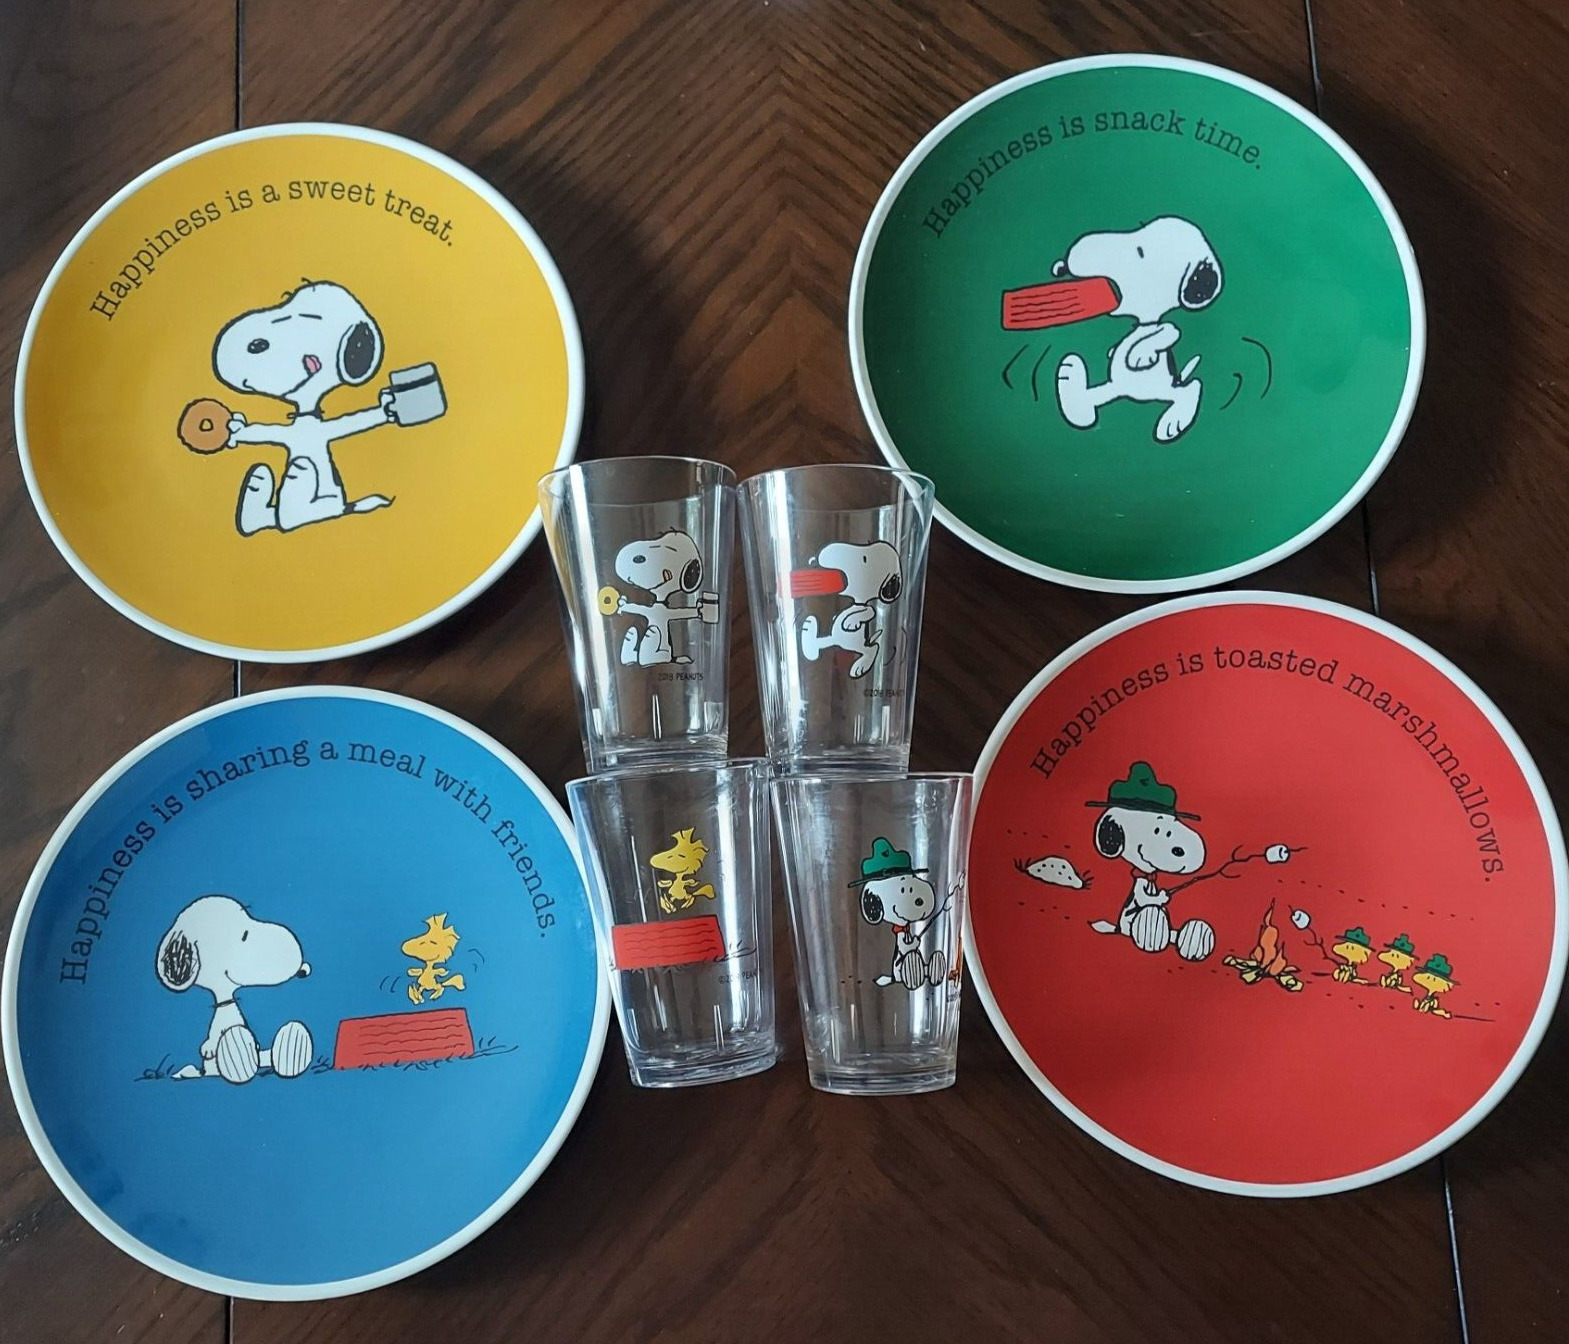 Peanuts / Snoopy Plastic Plates and Cup ( Set of 4)